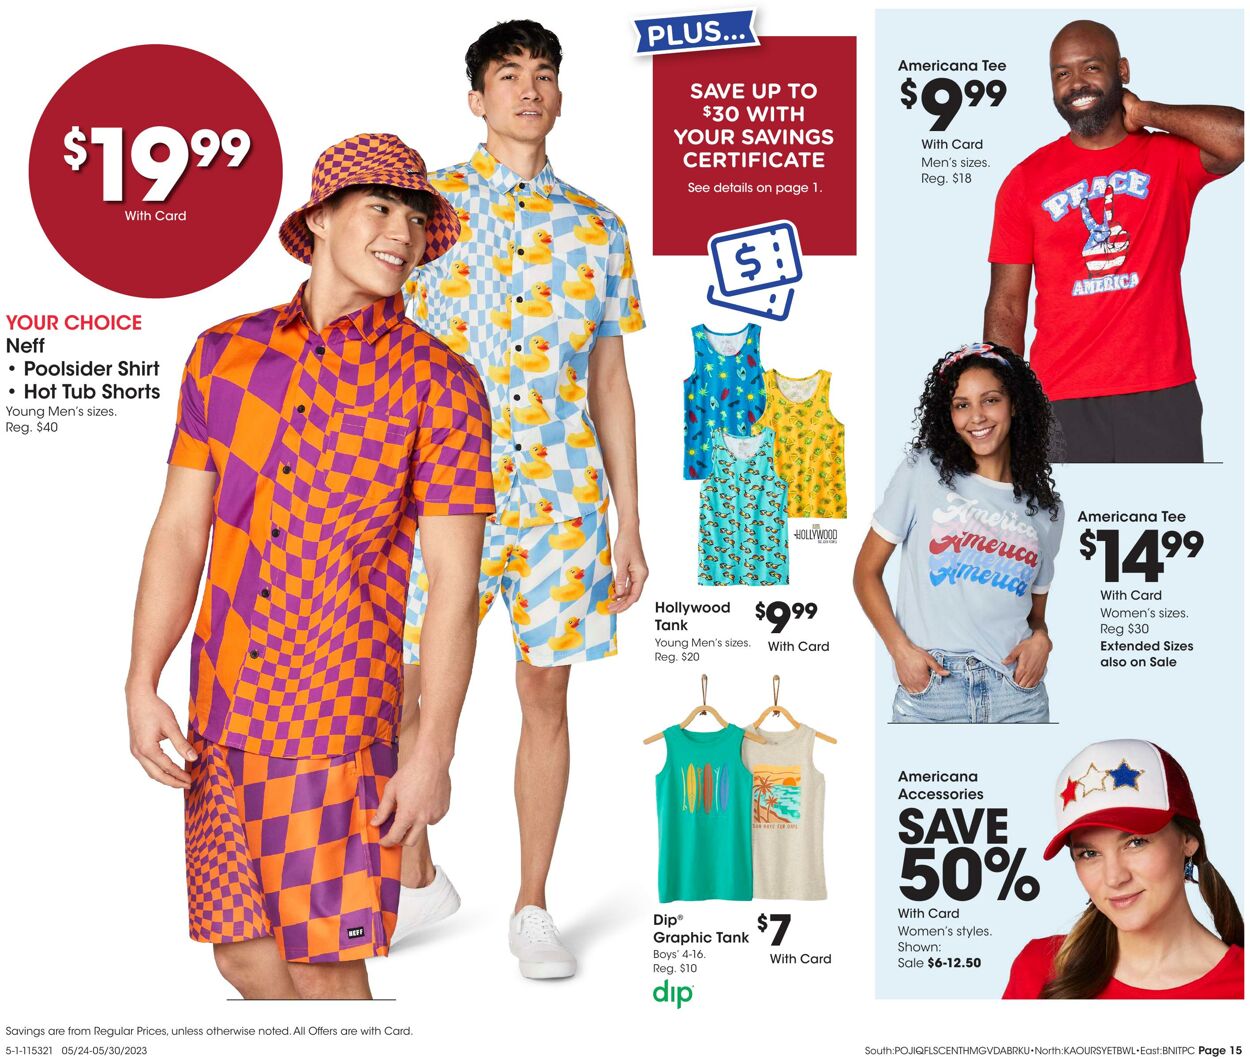 Weekly ad Fred Meyer 05/24/2023 - 05/30/2023